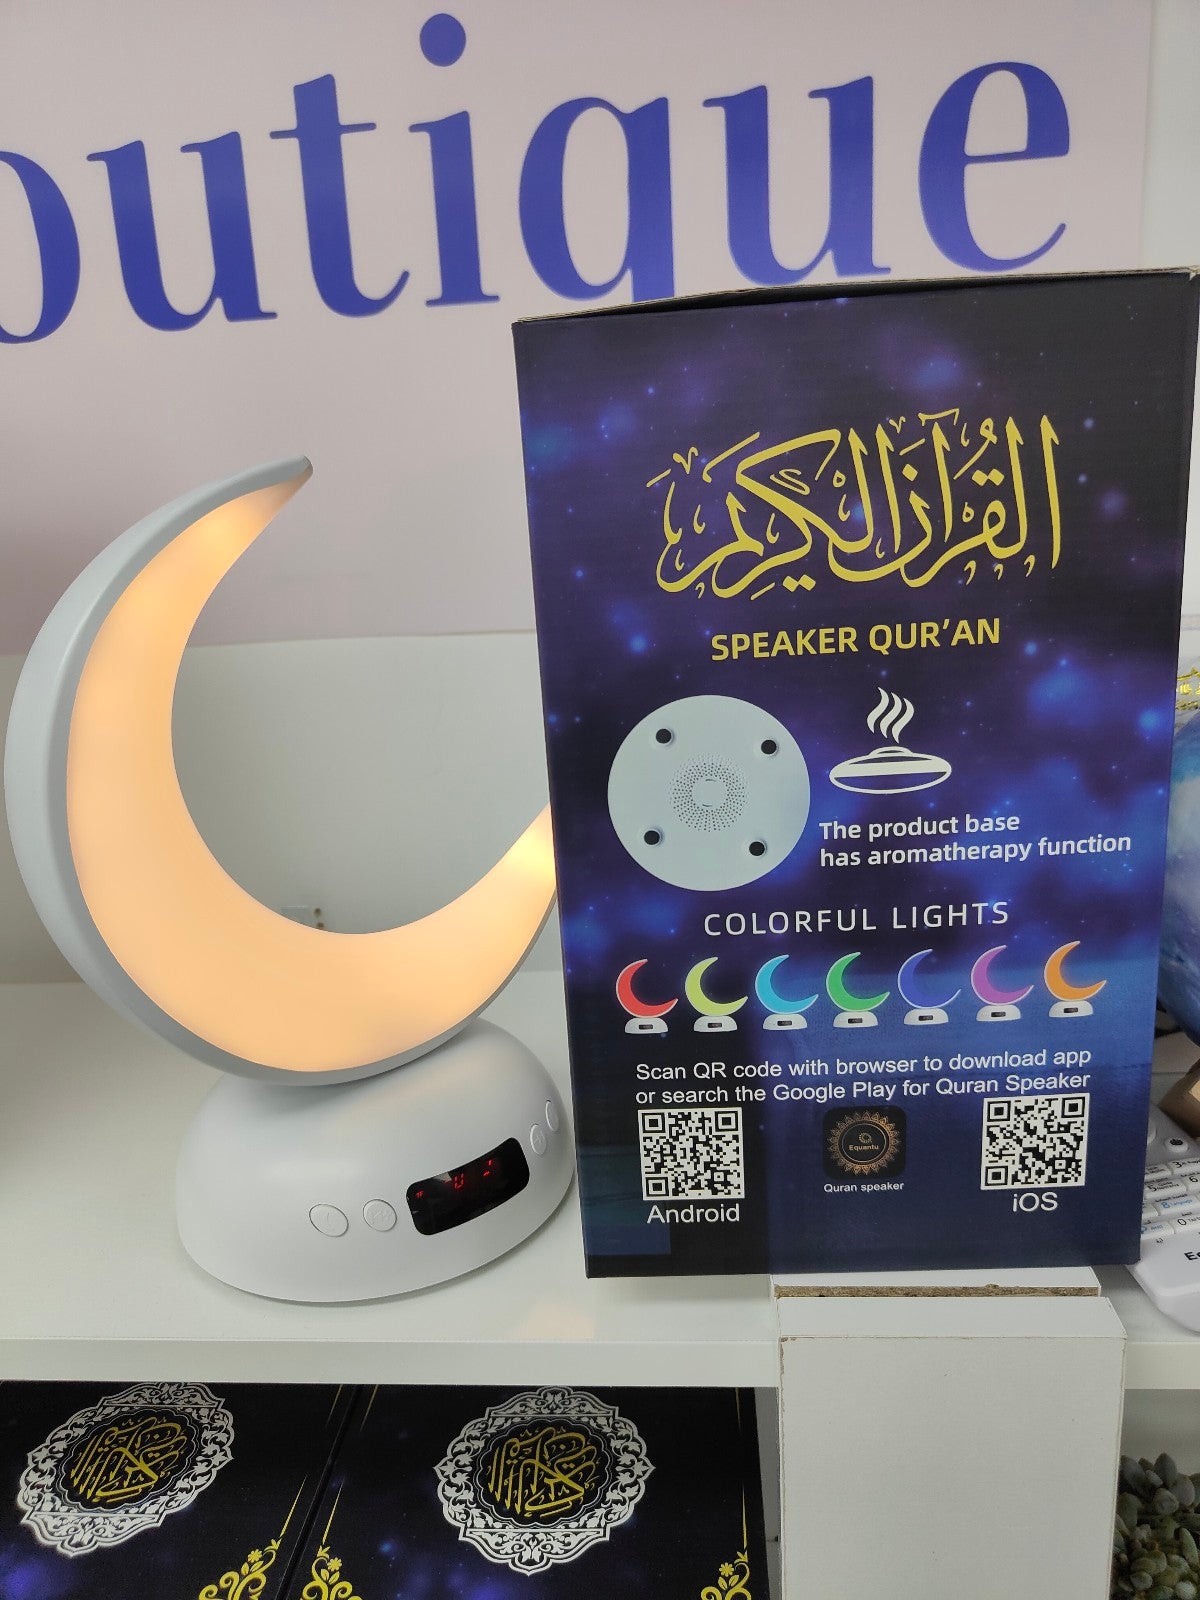 Elevate your spiritual journey with the premium Moon Light Quran Speaker with Azan Clock by Hikmah Boutique. Featuring Azan Clock, Bluetooth Control, and convenient App Control for a seamless and enriching experience. Elevate your spiritual experience with our premium Moon Light Quran Speaker with Azan Clock.